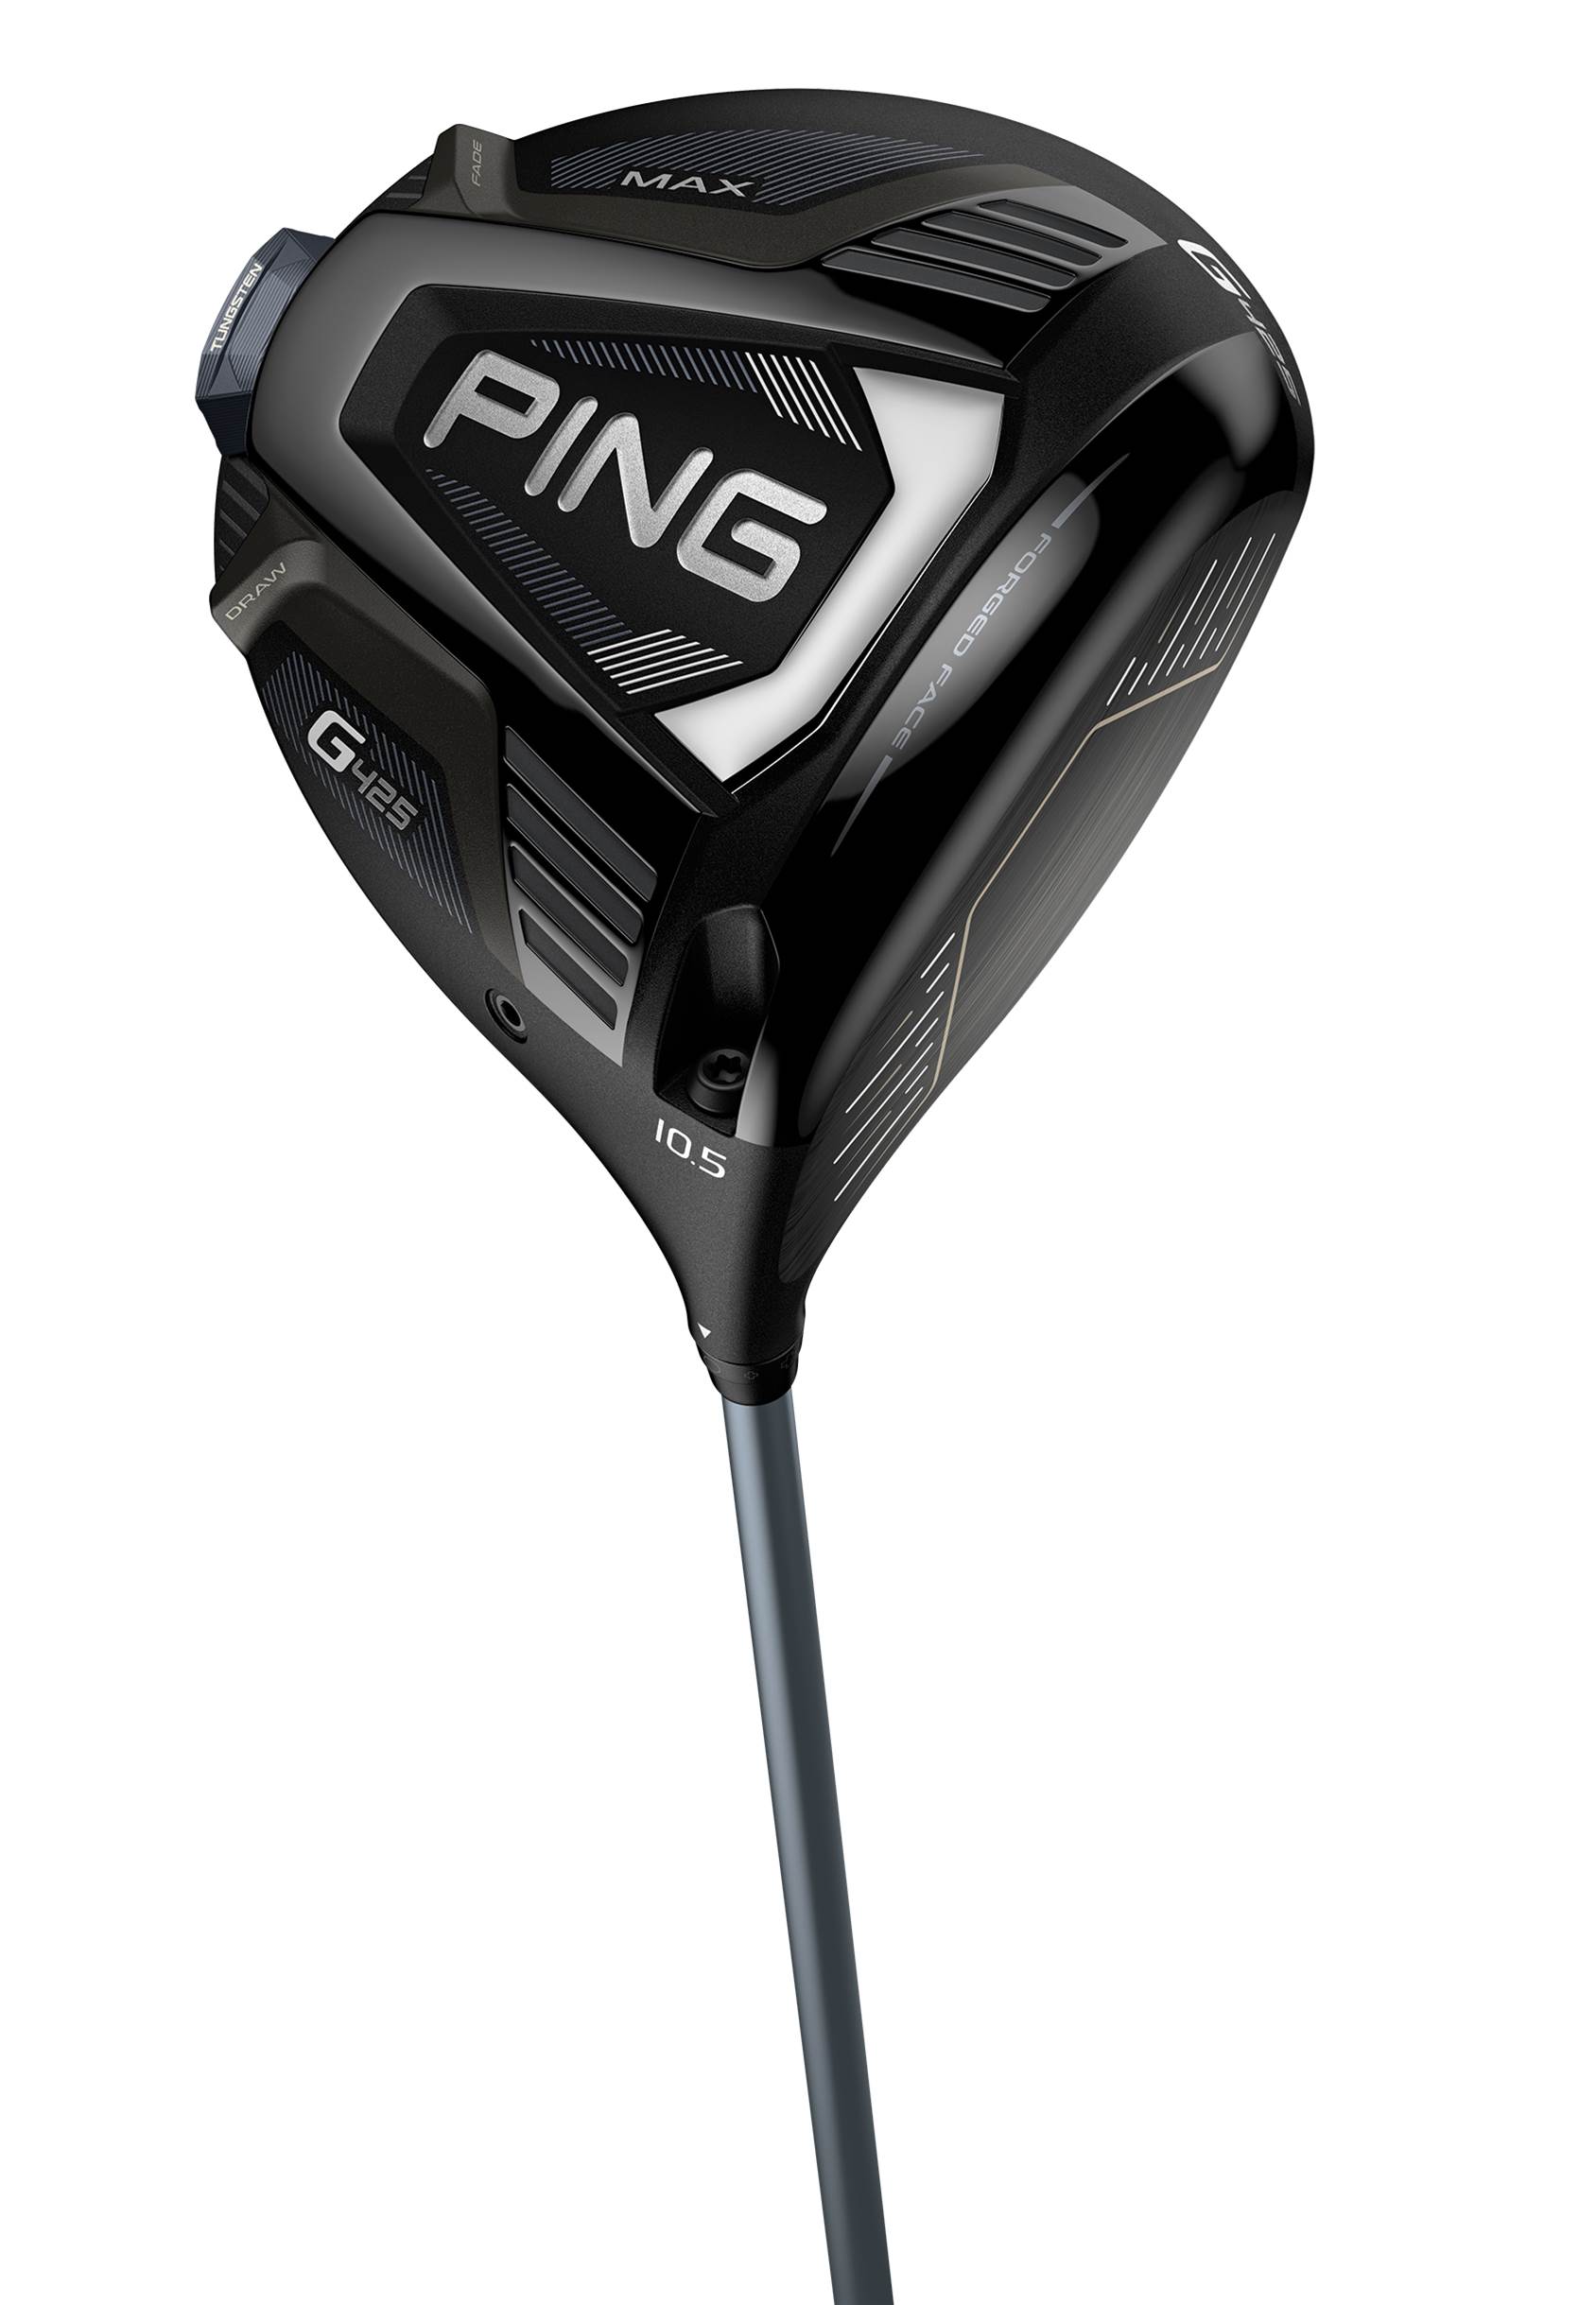 PING – Adrian Meronk wins the 2023 Italian Open with the G430 driver after  a thrilling finale - MyGolfWay - Plataforma Online del Sector del Golf -  Online Platform of Golf Industry